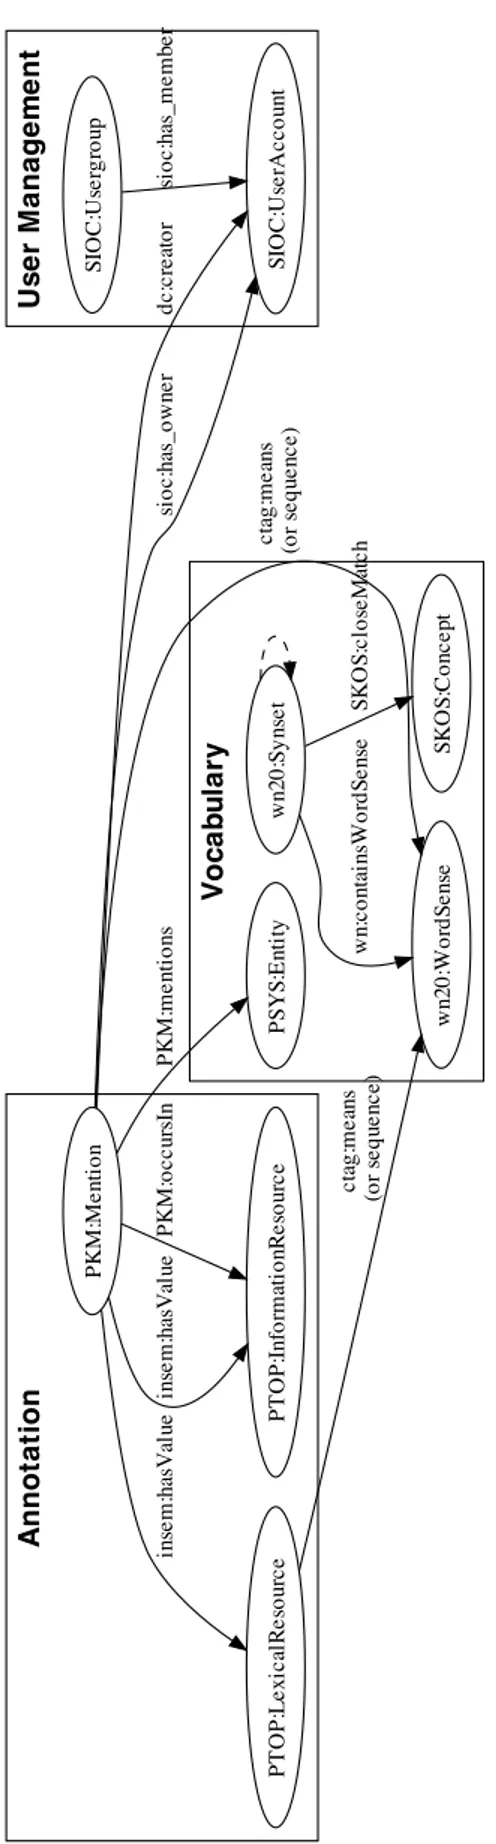 Figure 1: RDF Mapping for the Annotation Model